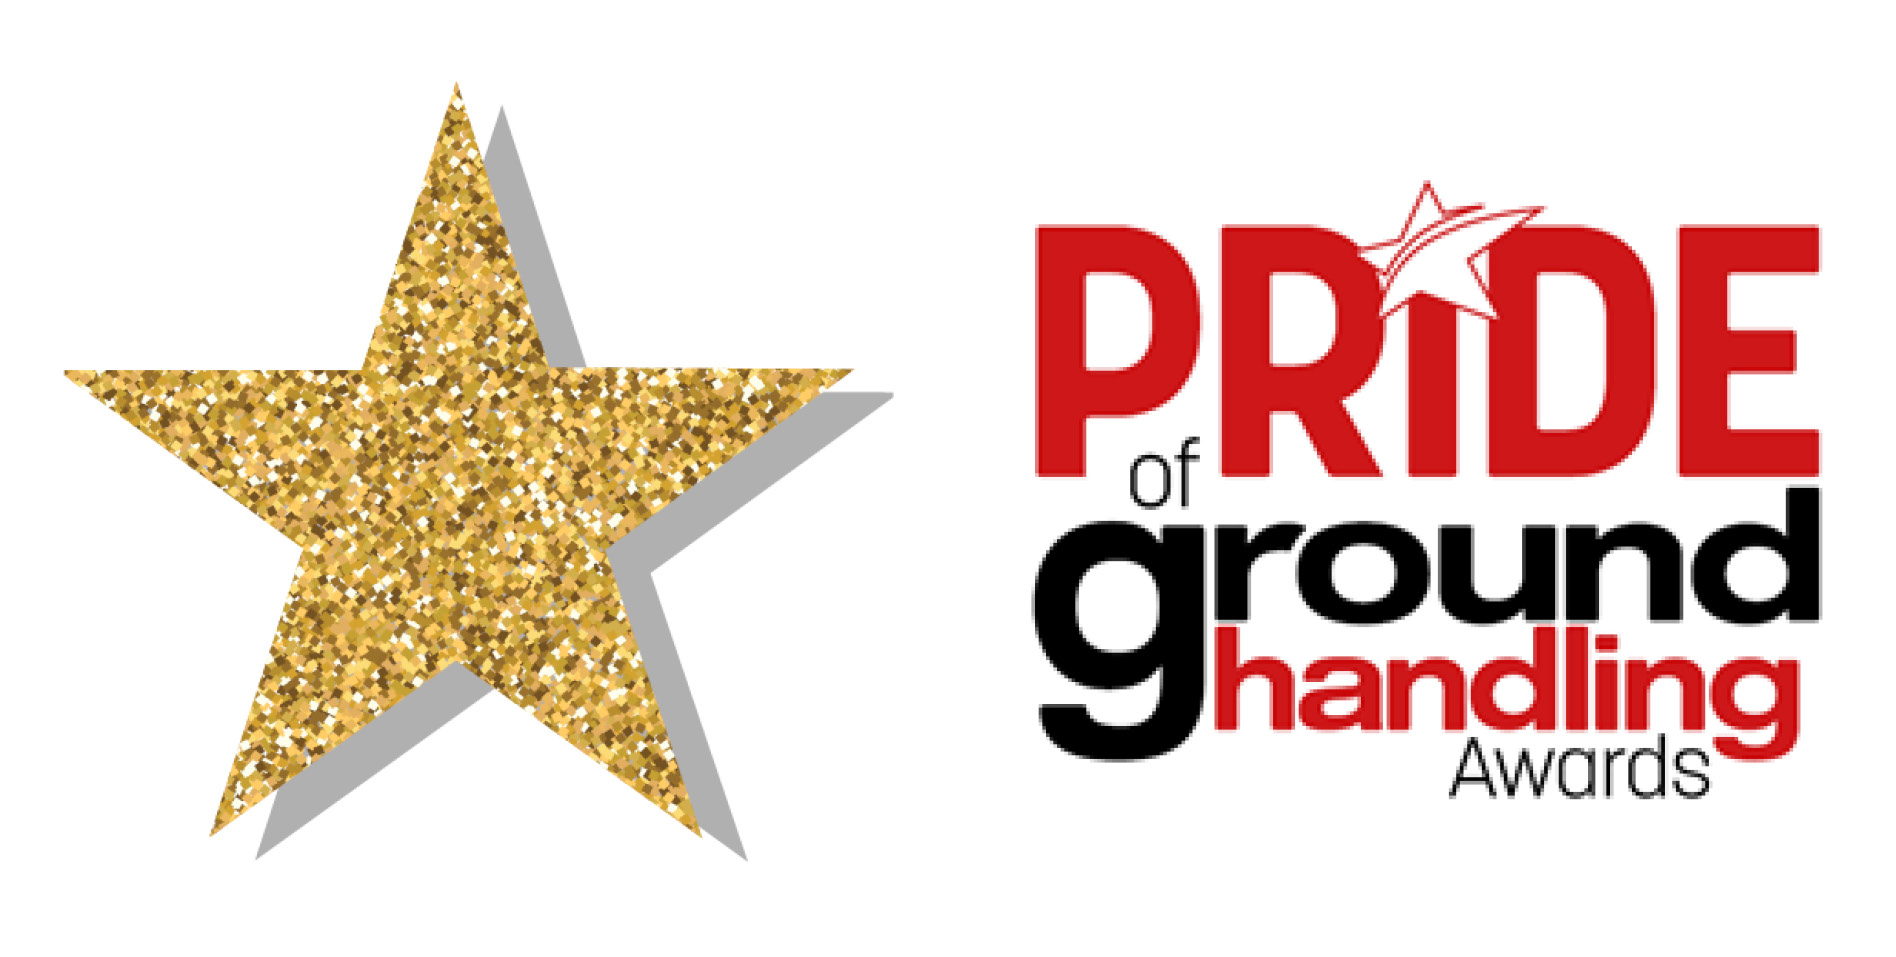 Gold star and GHI awards logo